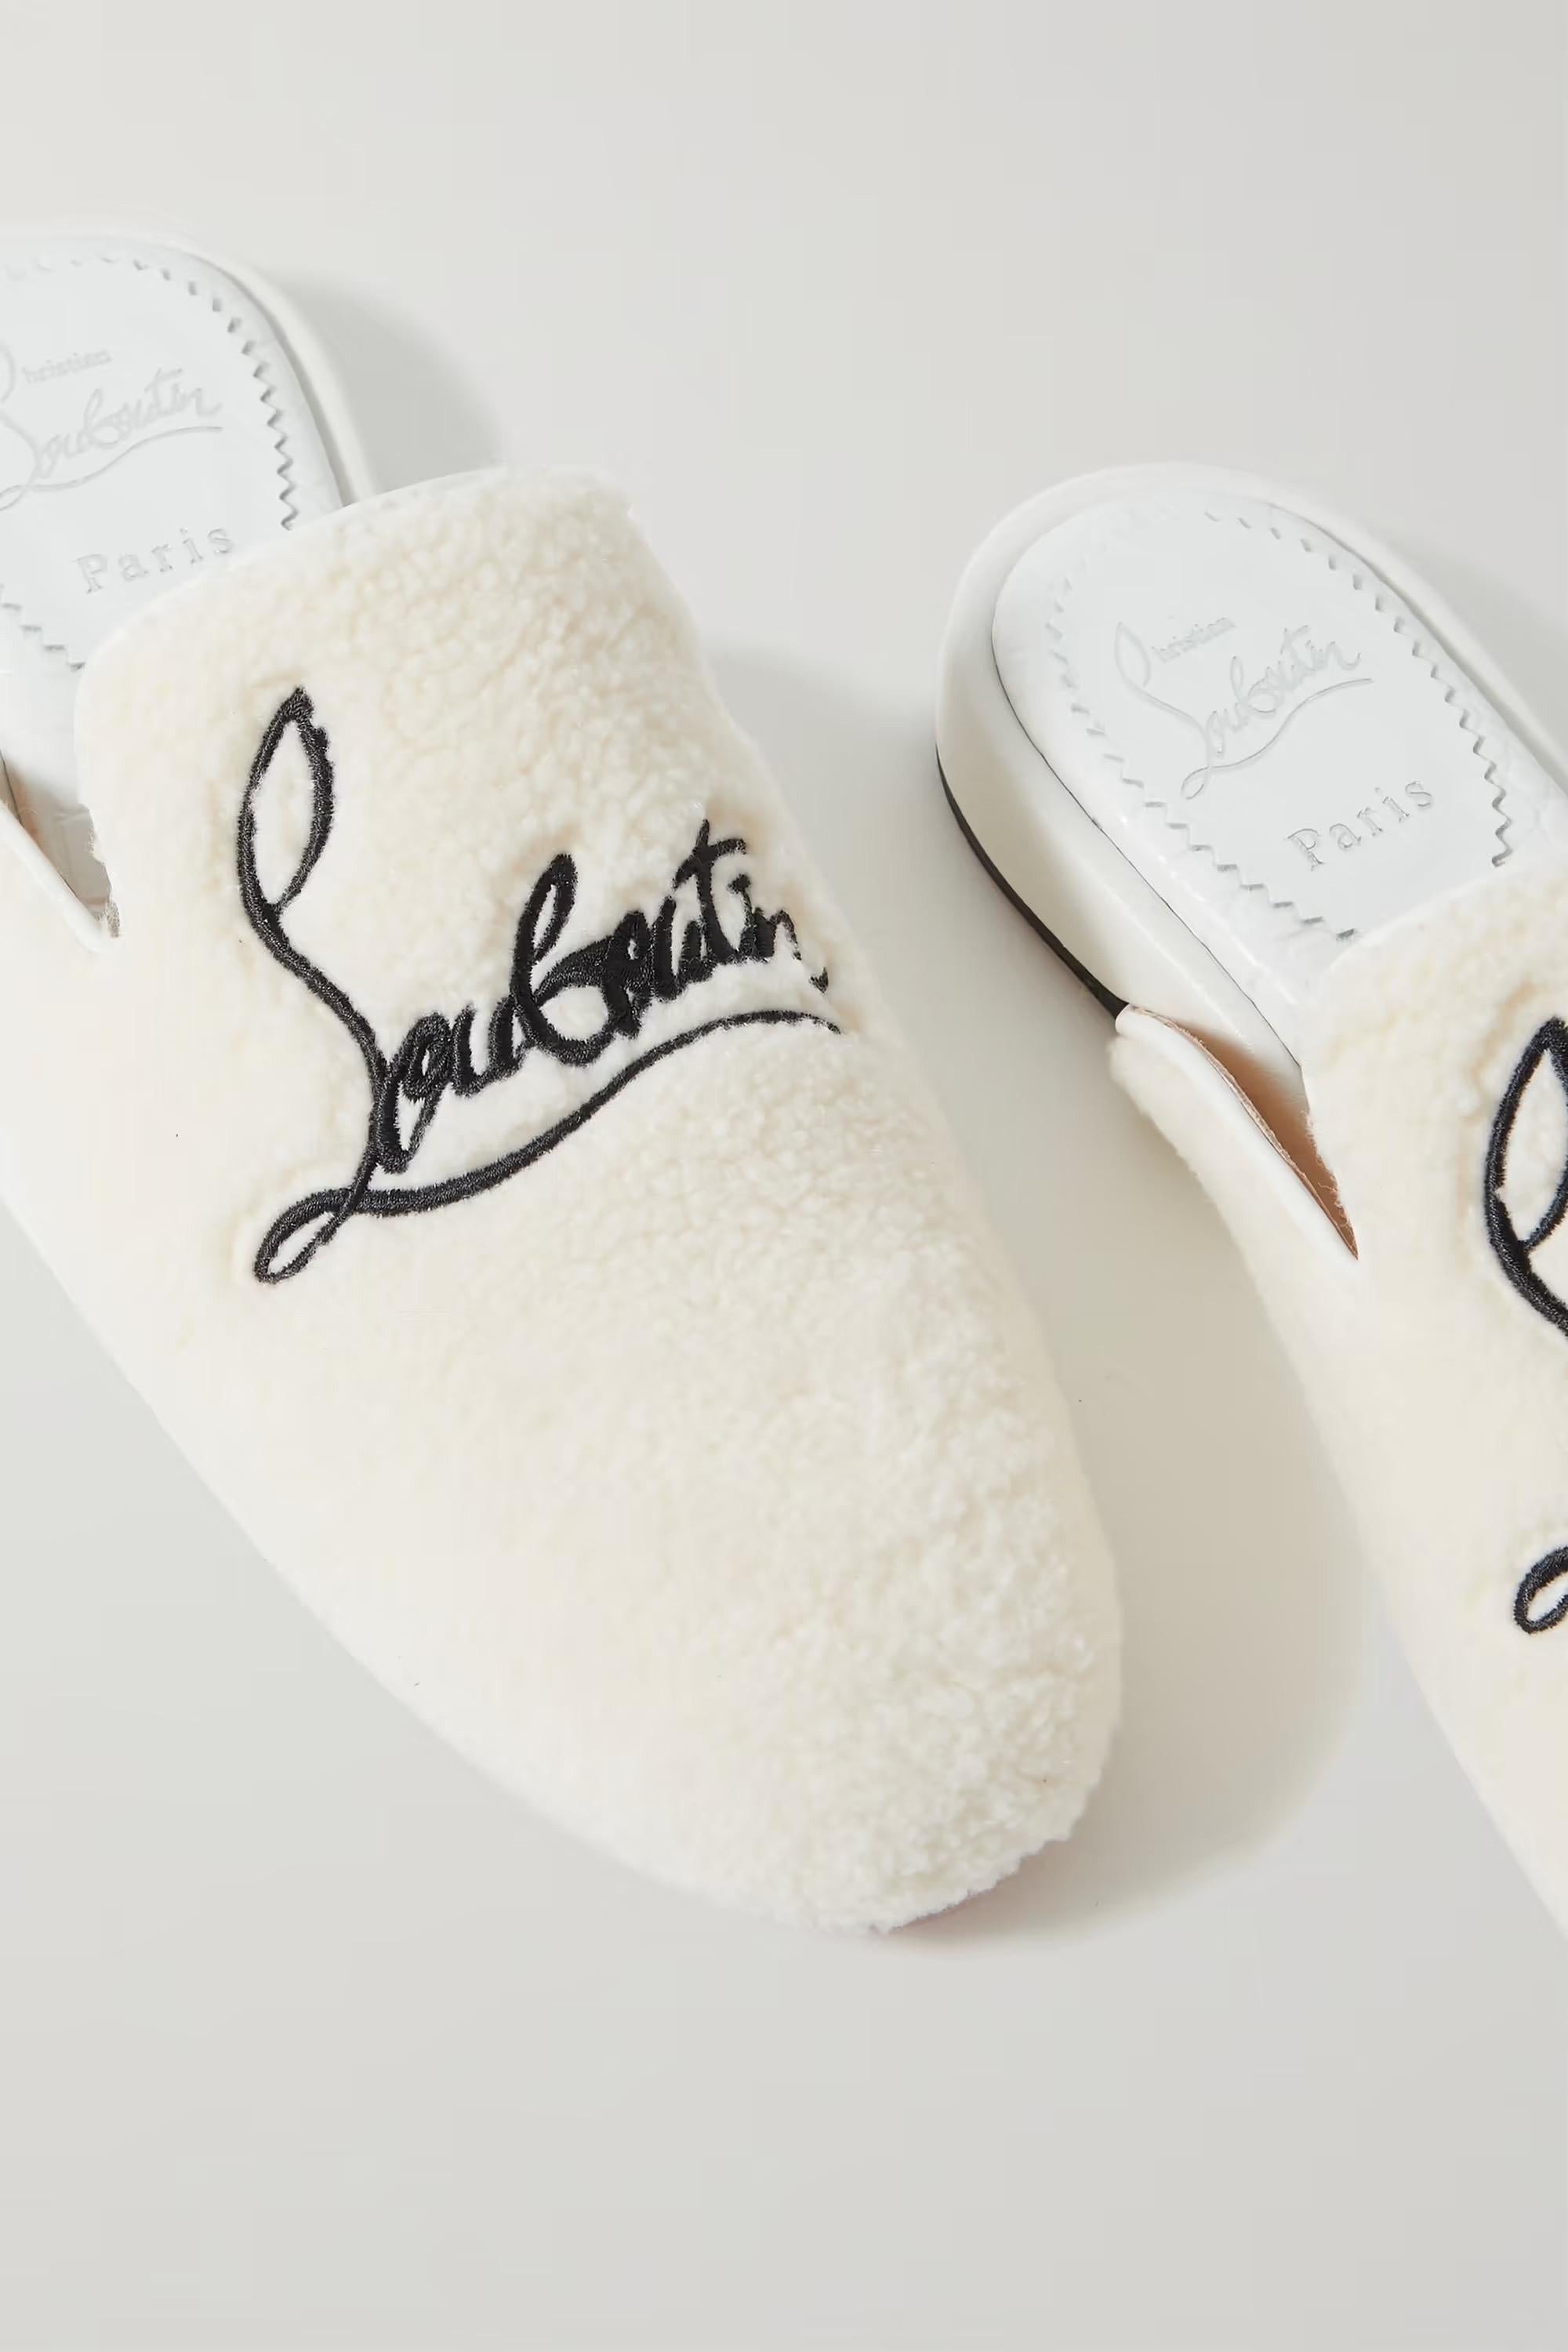 Christian Louboutin's slippers are such a luxurious option for lounging - they're set on rubber soles, so you can show them off outside, too. Made in Italy from plush faux shearling, they're embroidered with the house's moniker and lined in smooth